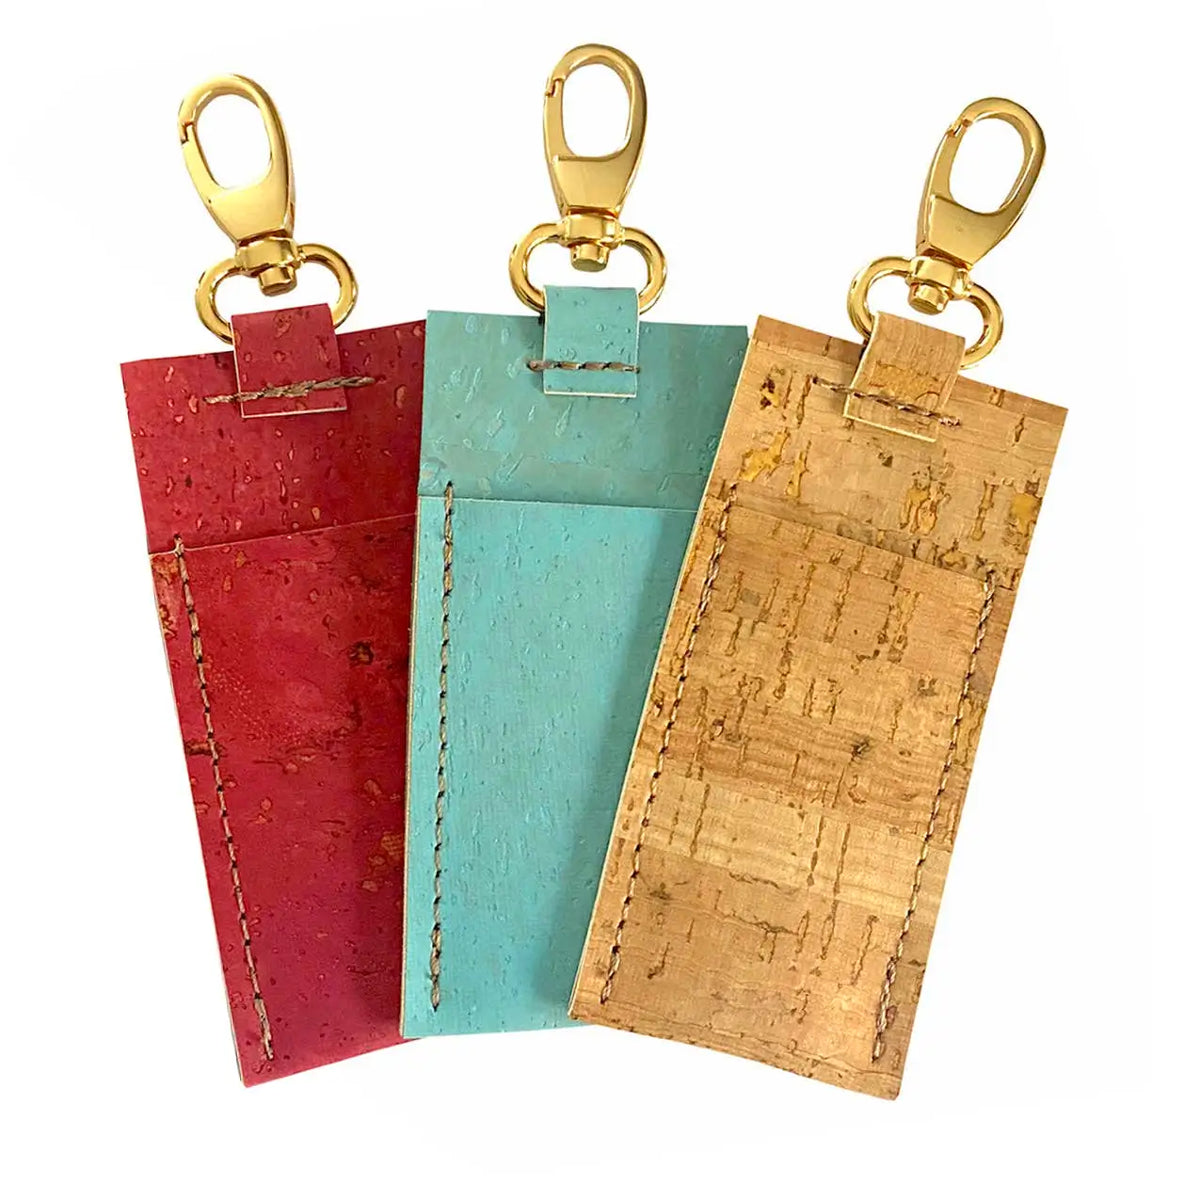 Lip Balm Holders shown in Red, Tan and Blue